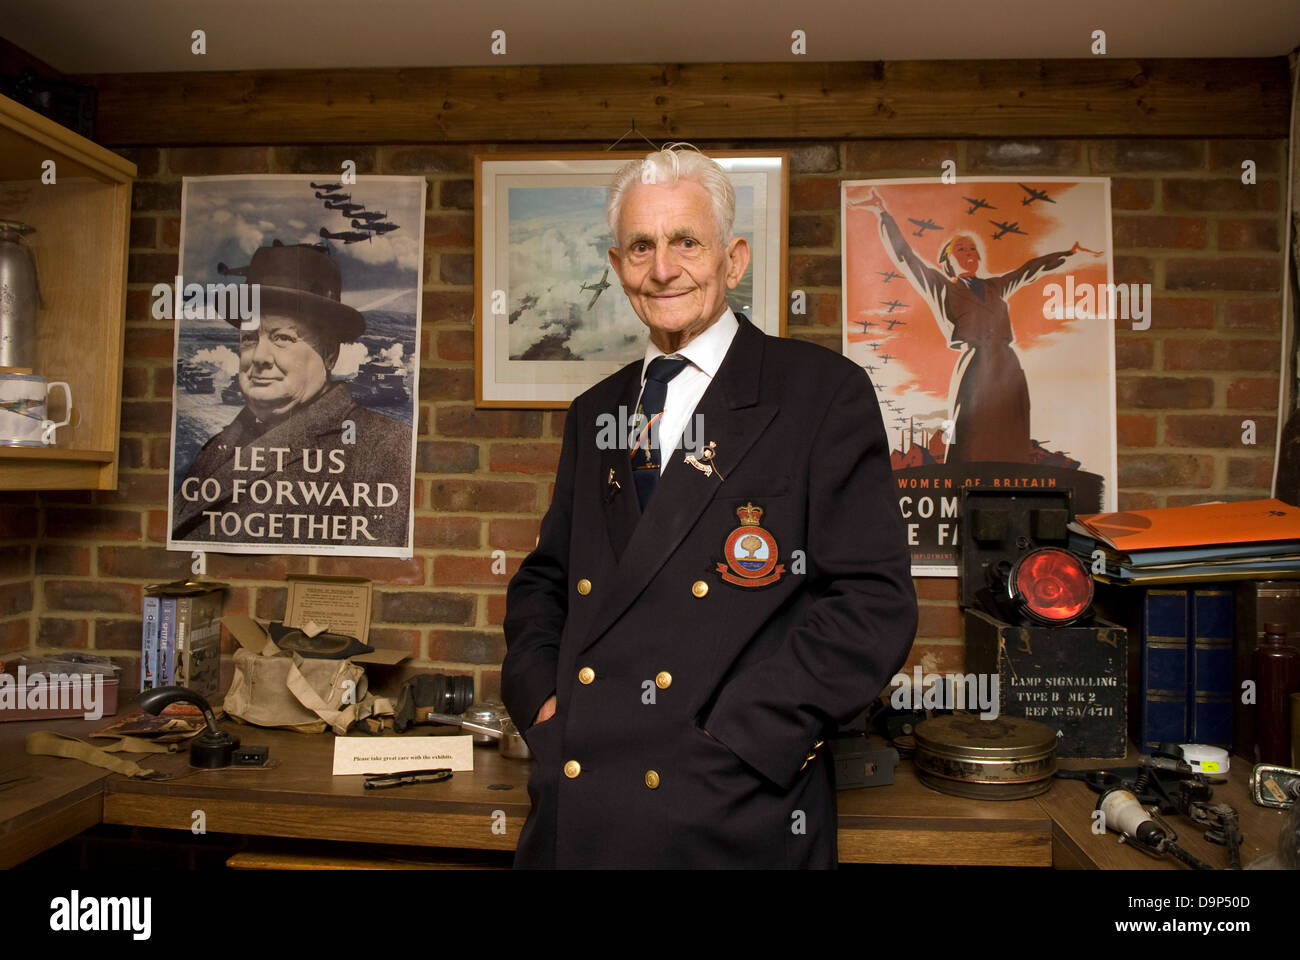 Former Sergeant in REME (Royal Electrical Mechanical Engineers) with World War Two memorabilia, Whitehill, Bordon, Hampshire, UK. Stock Photo